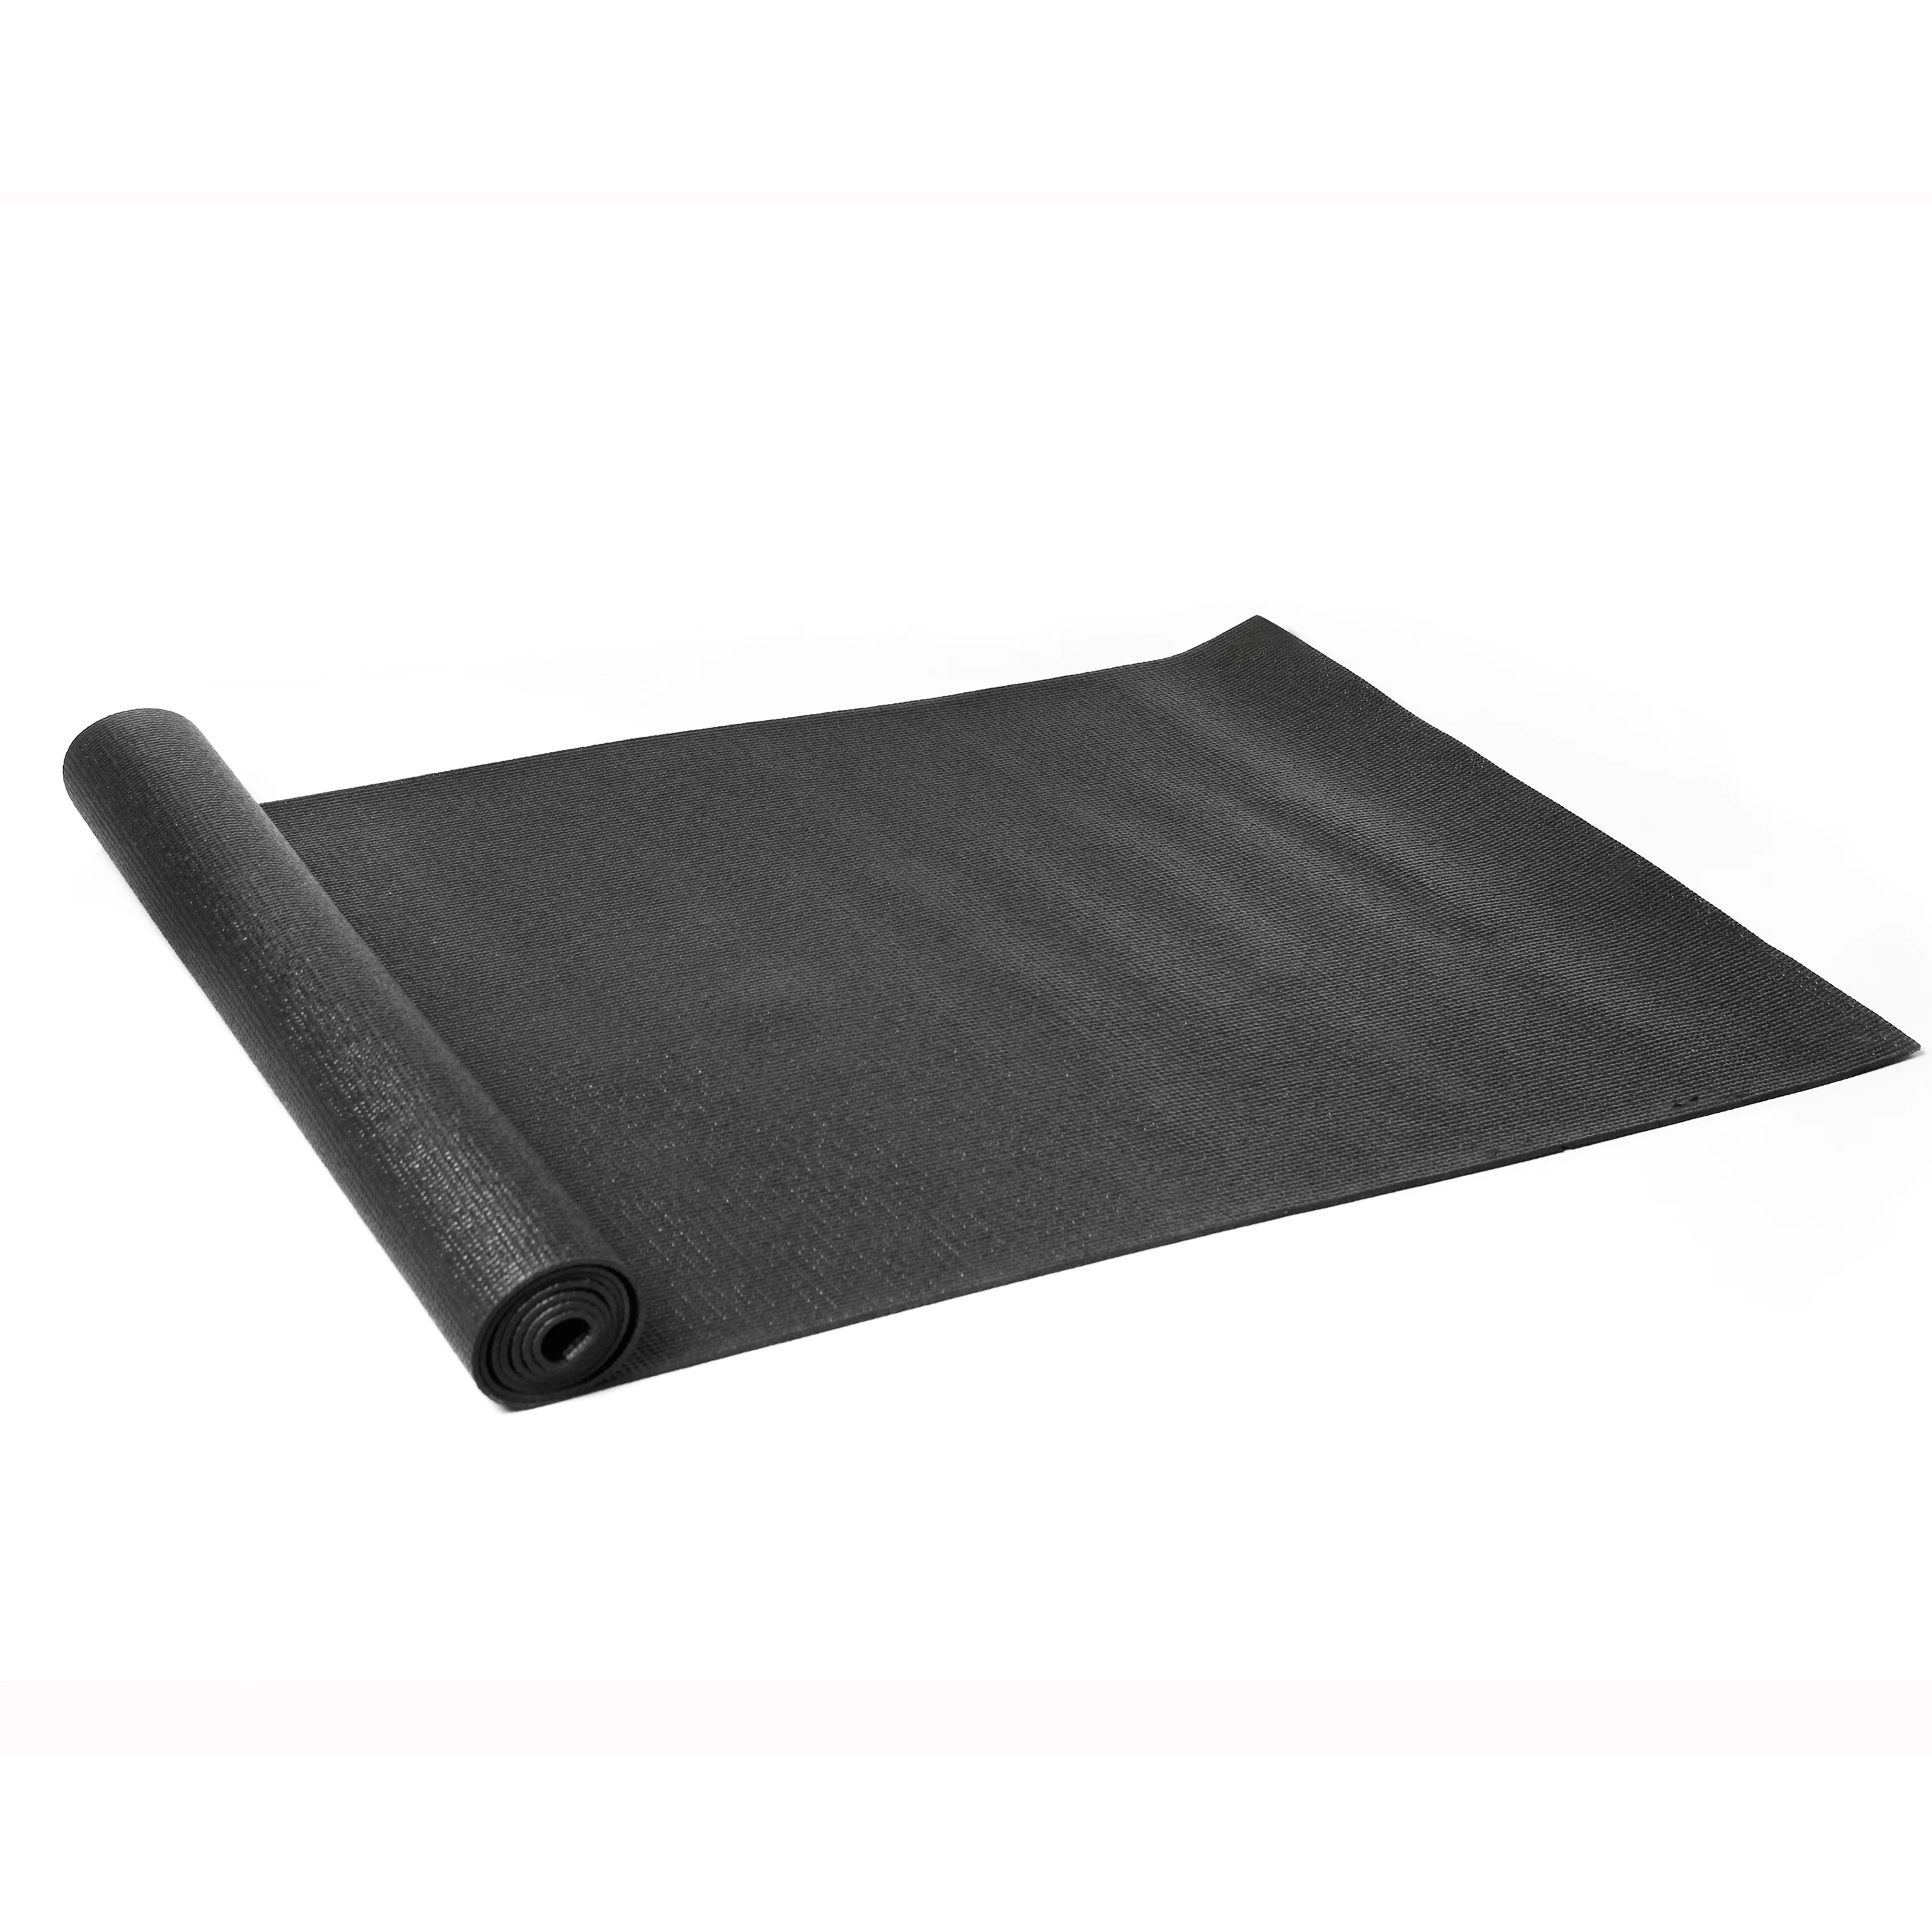 Athletic Works PVC Yoga Mat, 3mm, Dark Gray, 68inx24in, Nonslip, Cushioning for Support and Stability